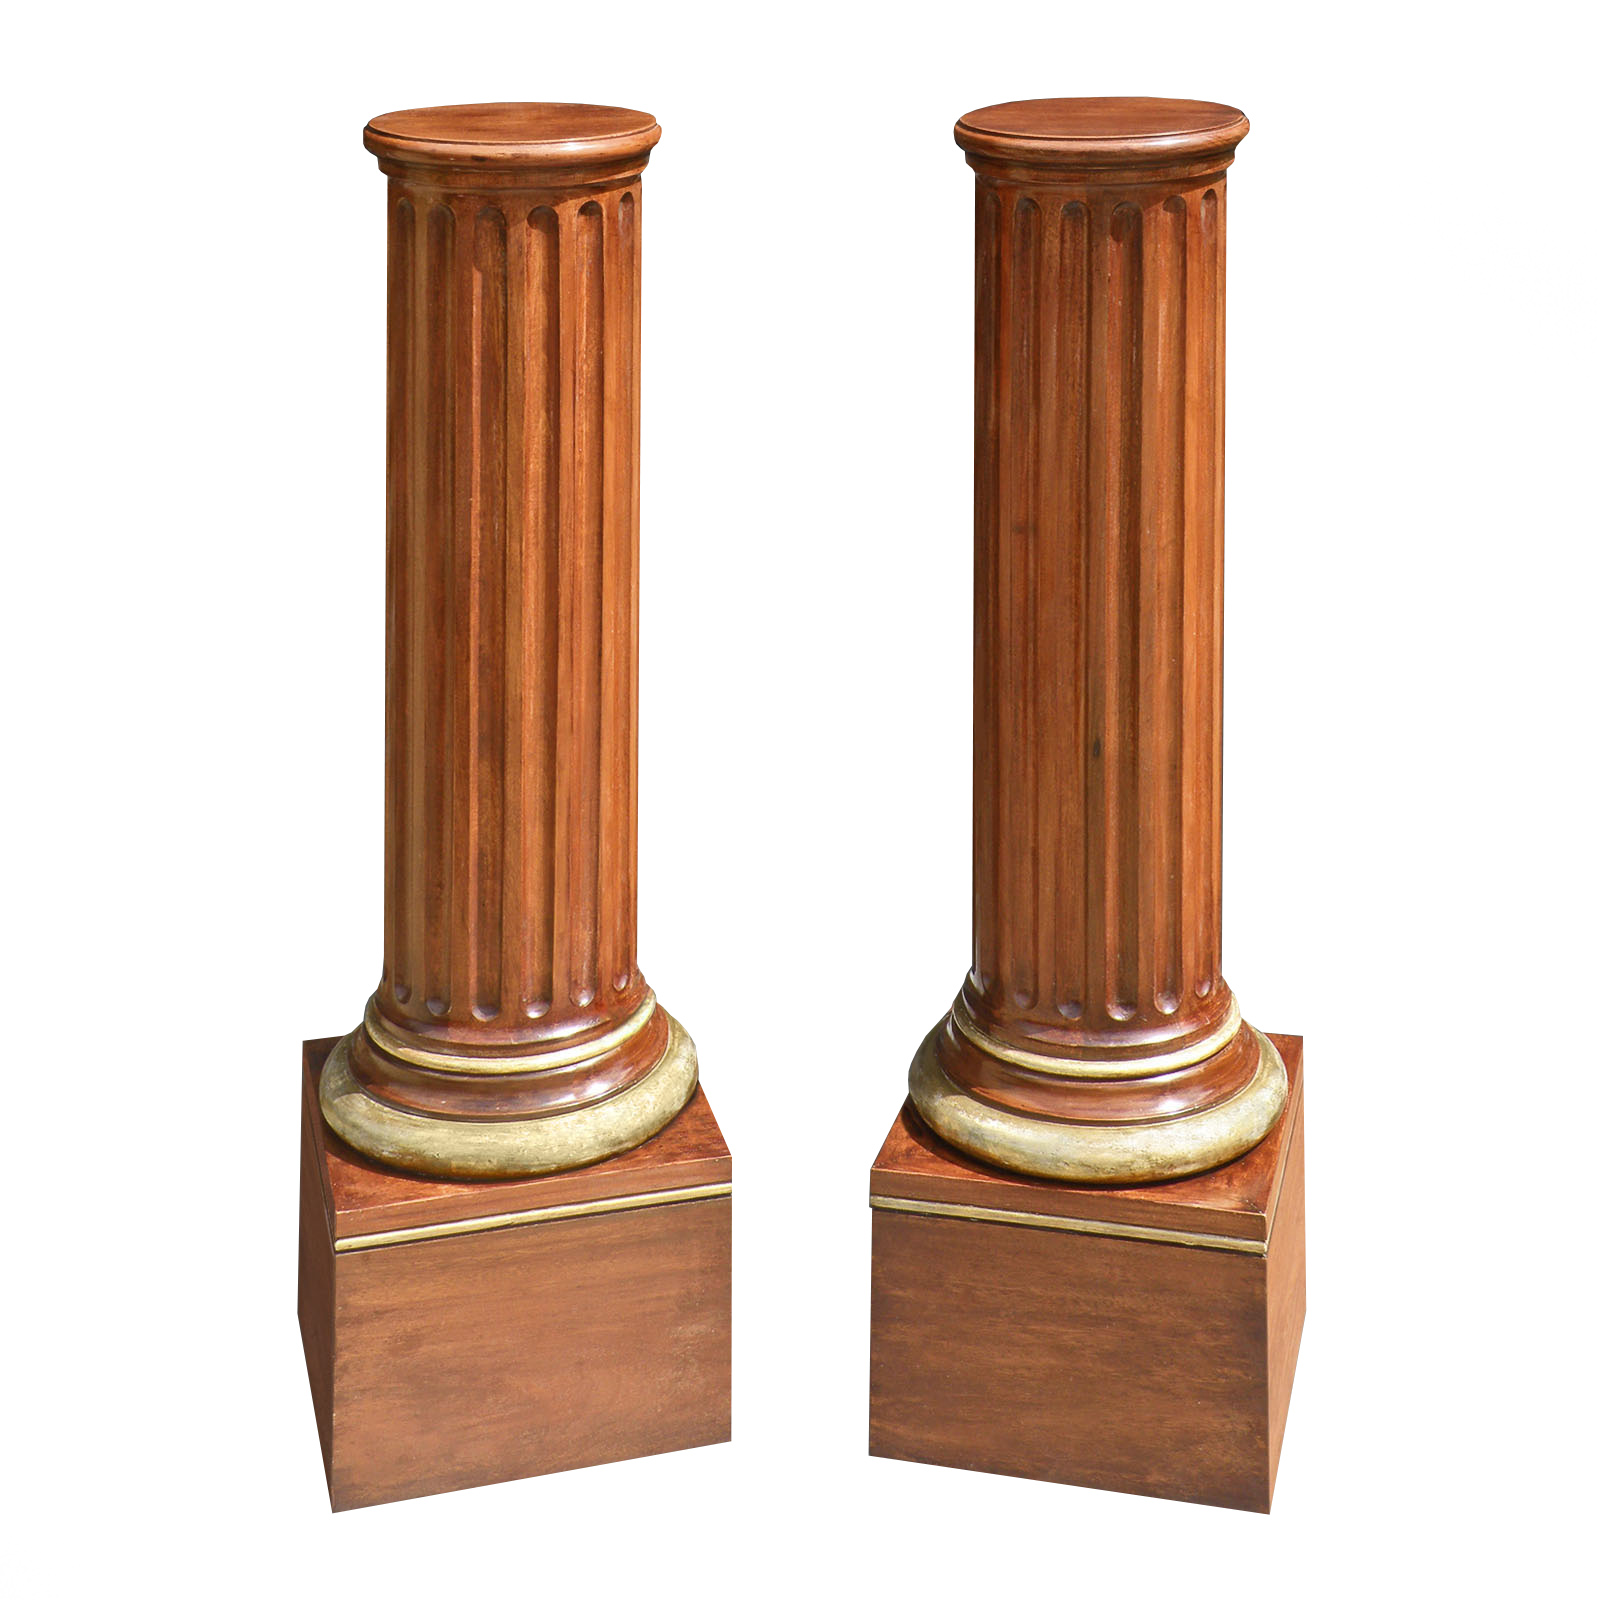 Pair of parcel gilt mahogany pedestals. Made to order by Perceval Designs